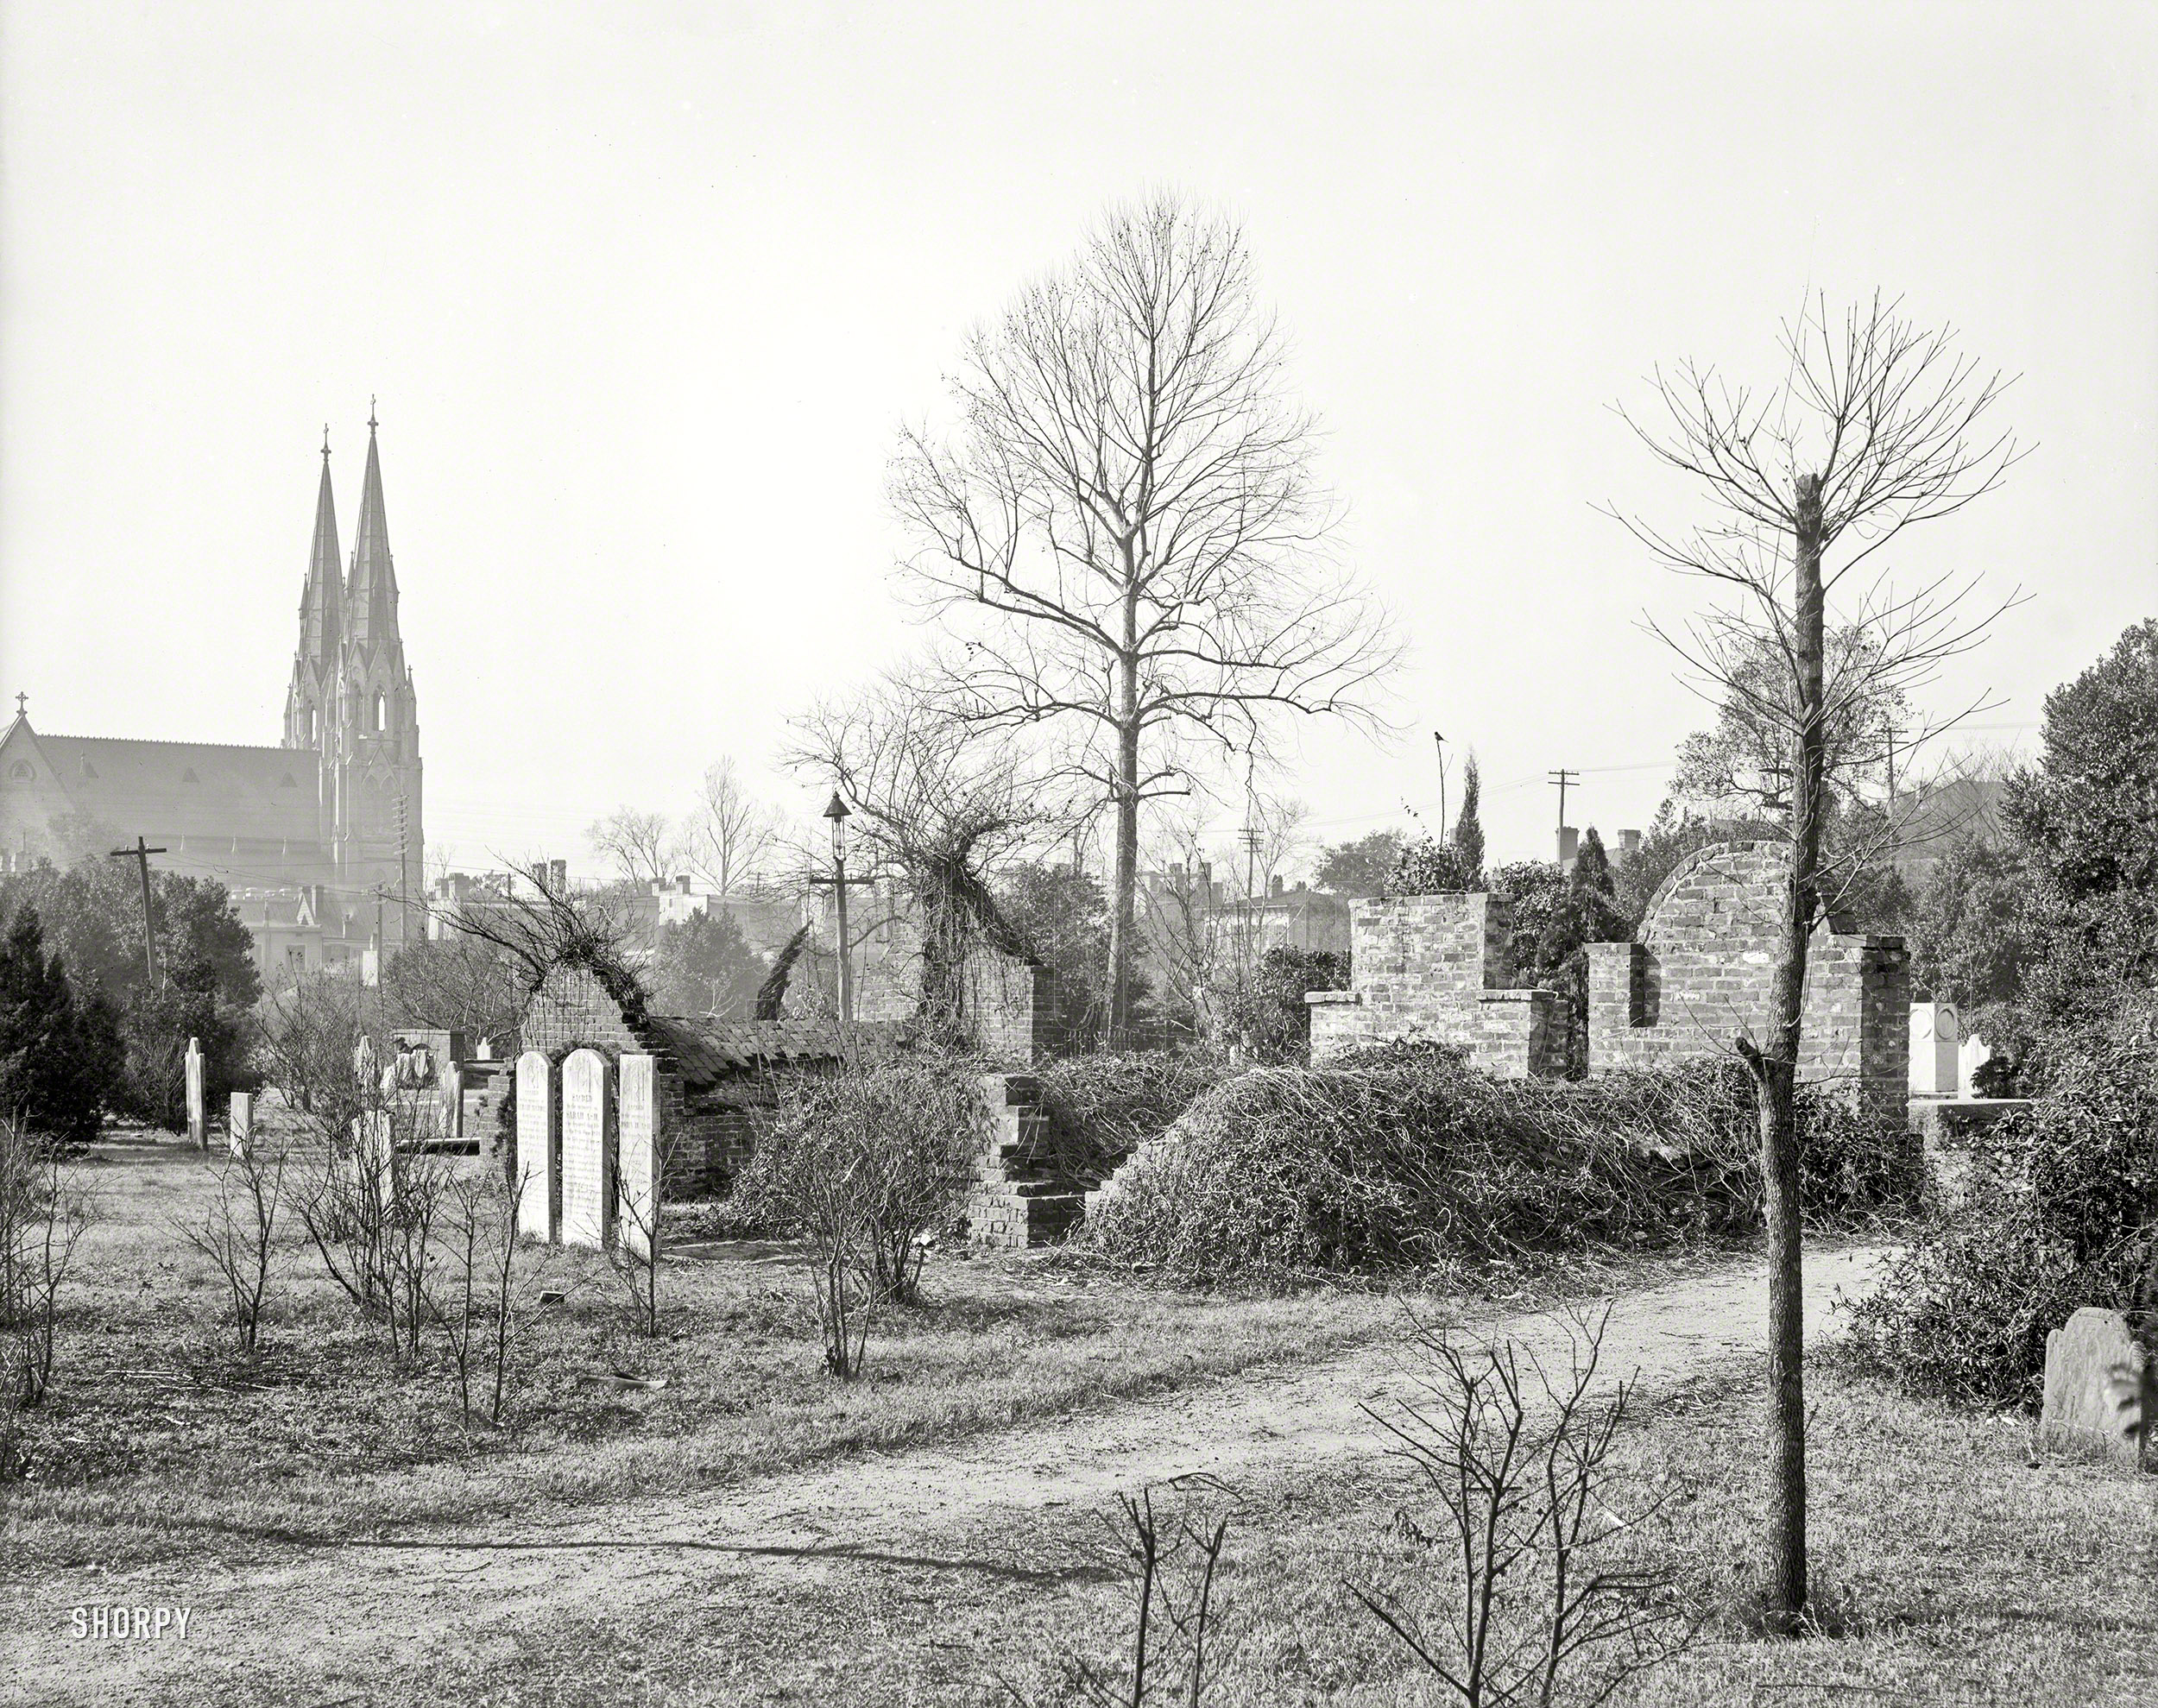 Savannah, Georgia, 1904. "Colonial Park Cemetery." By the looks of it, in need of a trim from the Grim Reaper, or at least a spritz of Roundup. View full size.